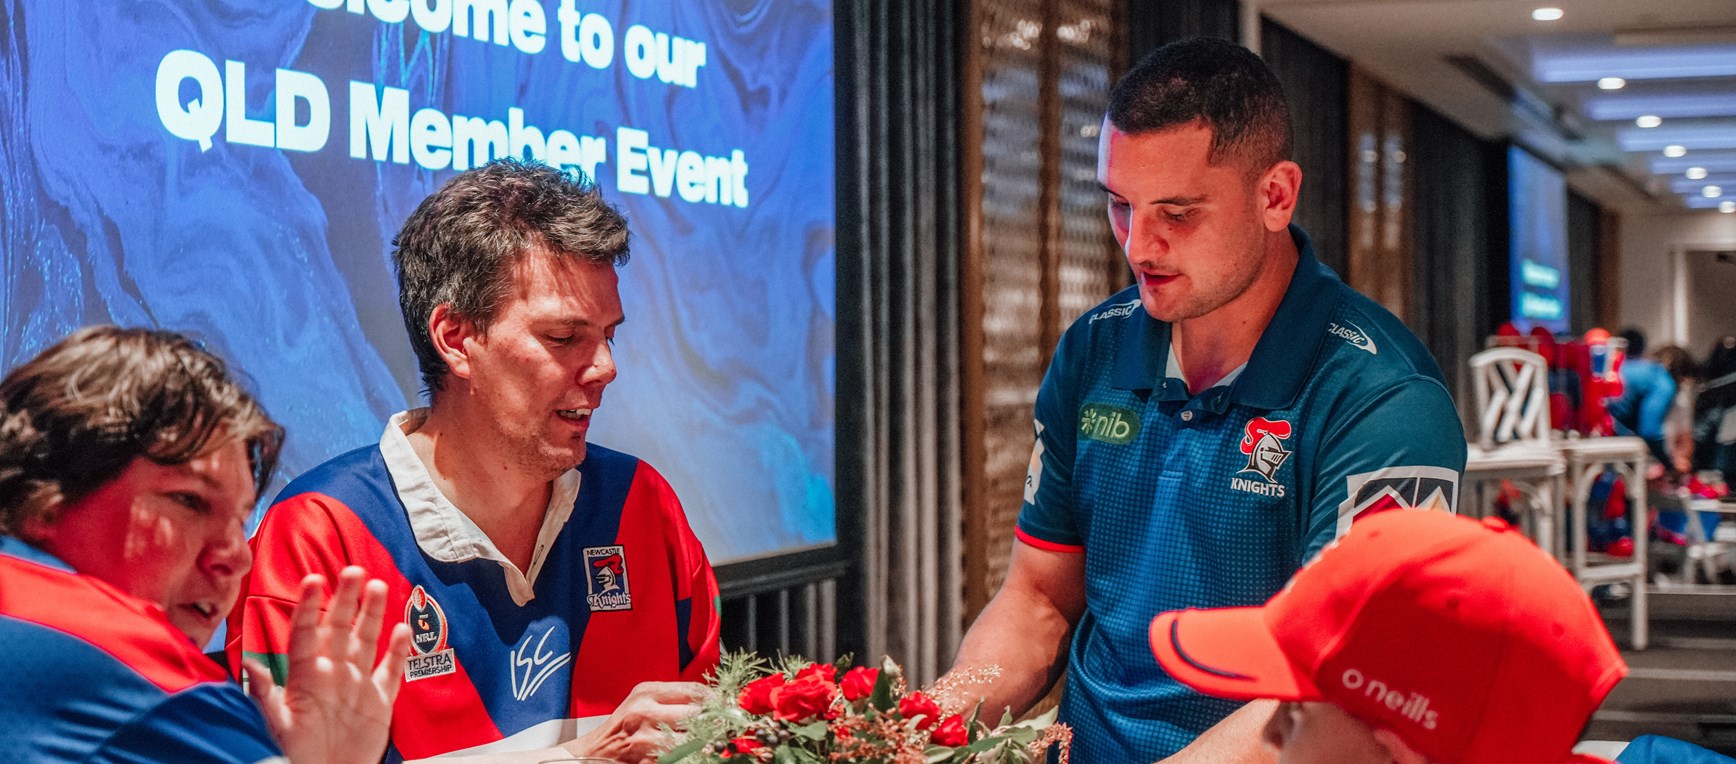 Gallery: QLD Member Event